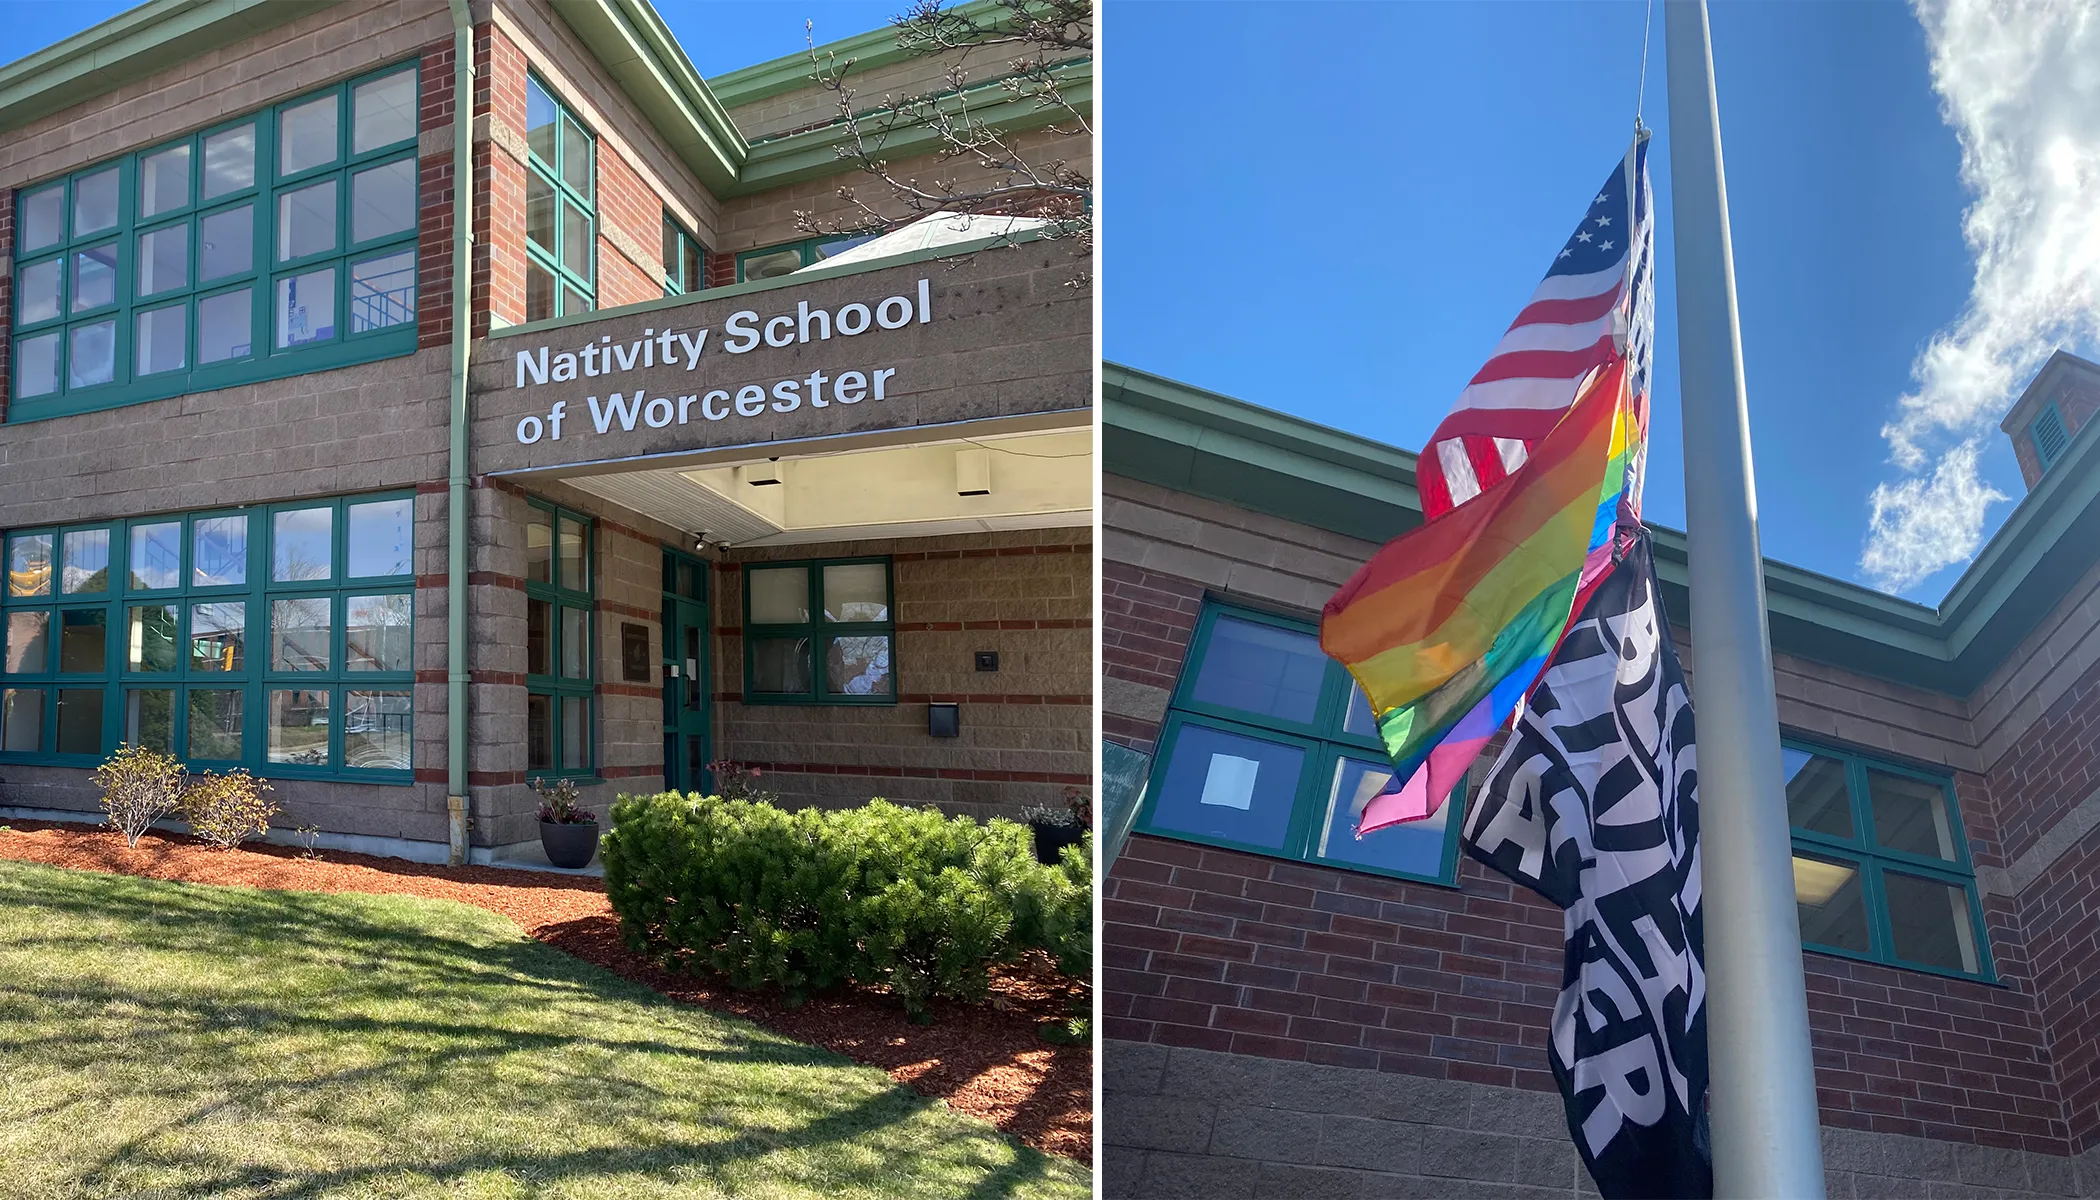 Black Lives Matter flag and LGBT pride flag fly outside Nativity School of Worcester, a Jesuit middle school in the diocese of Worcester, Massachusetts, in April 2022.?w=200&h=150